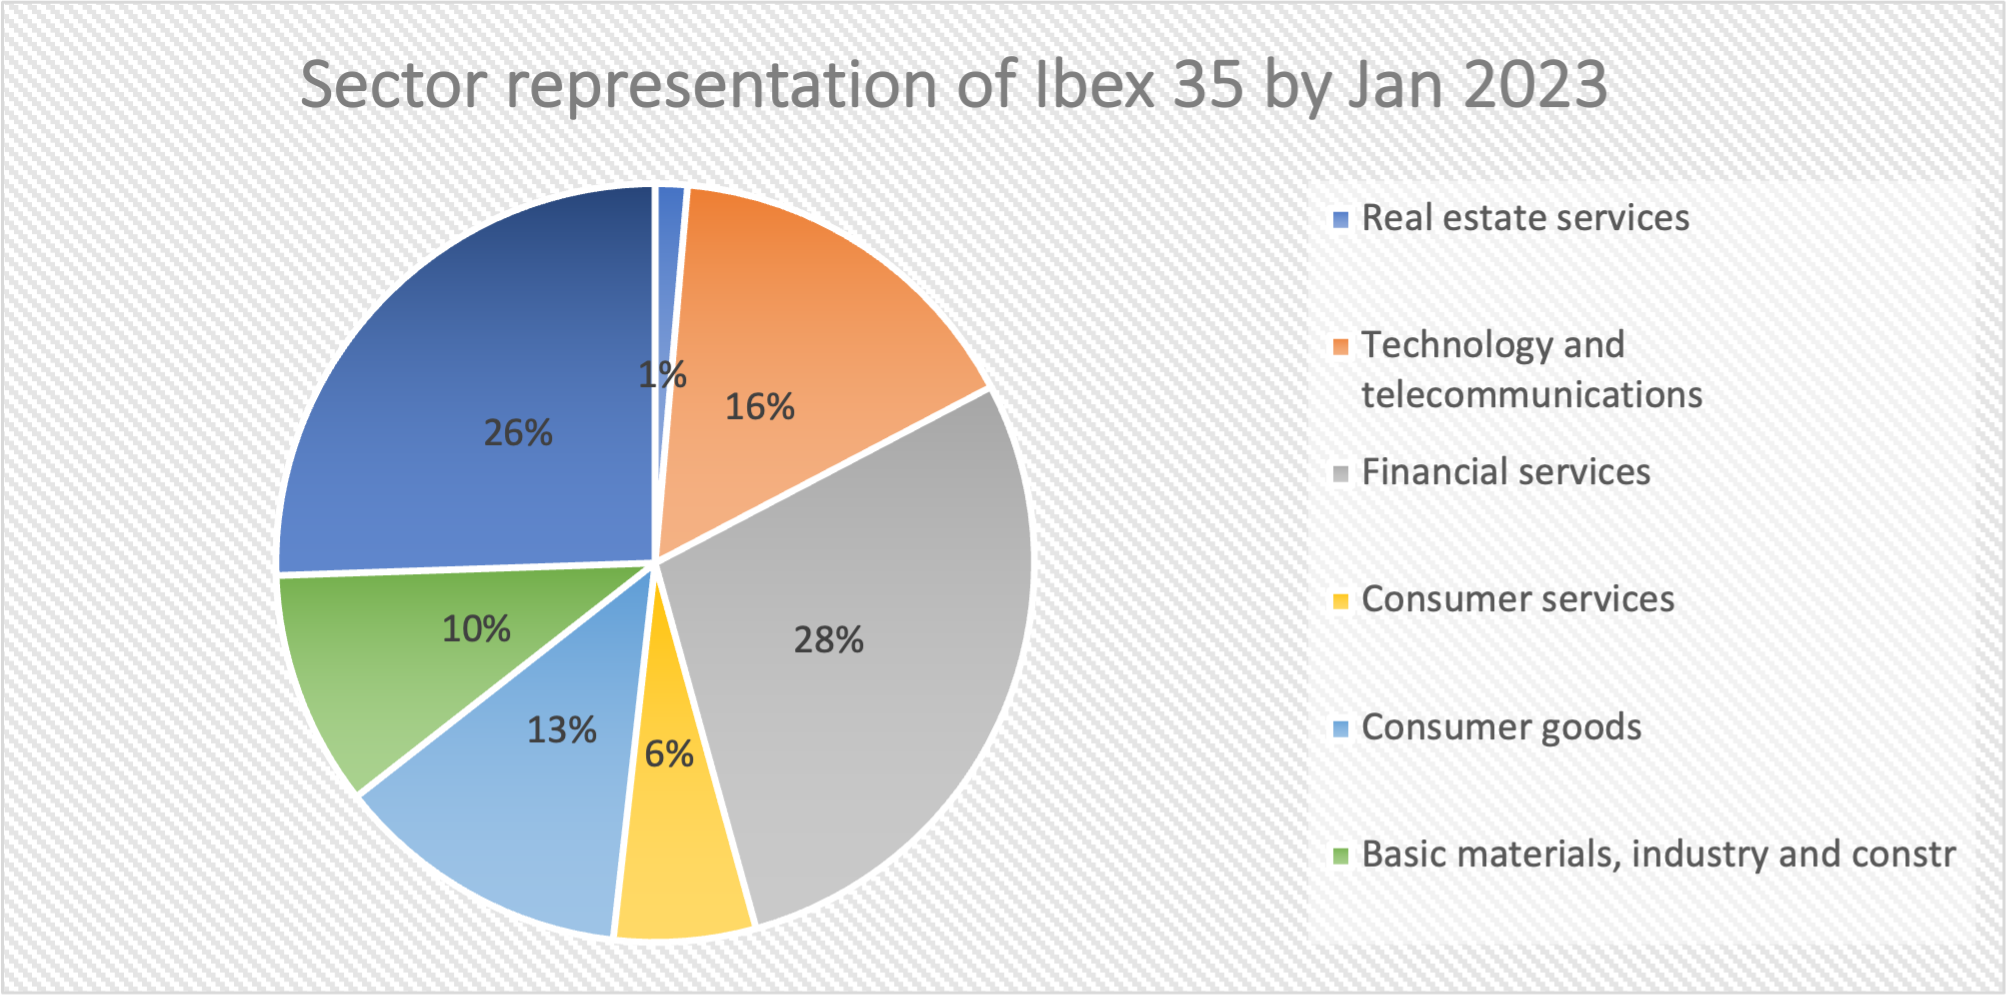 Sector representation in the IBEX  35 index